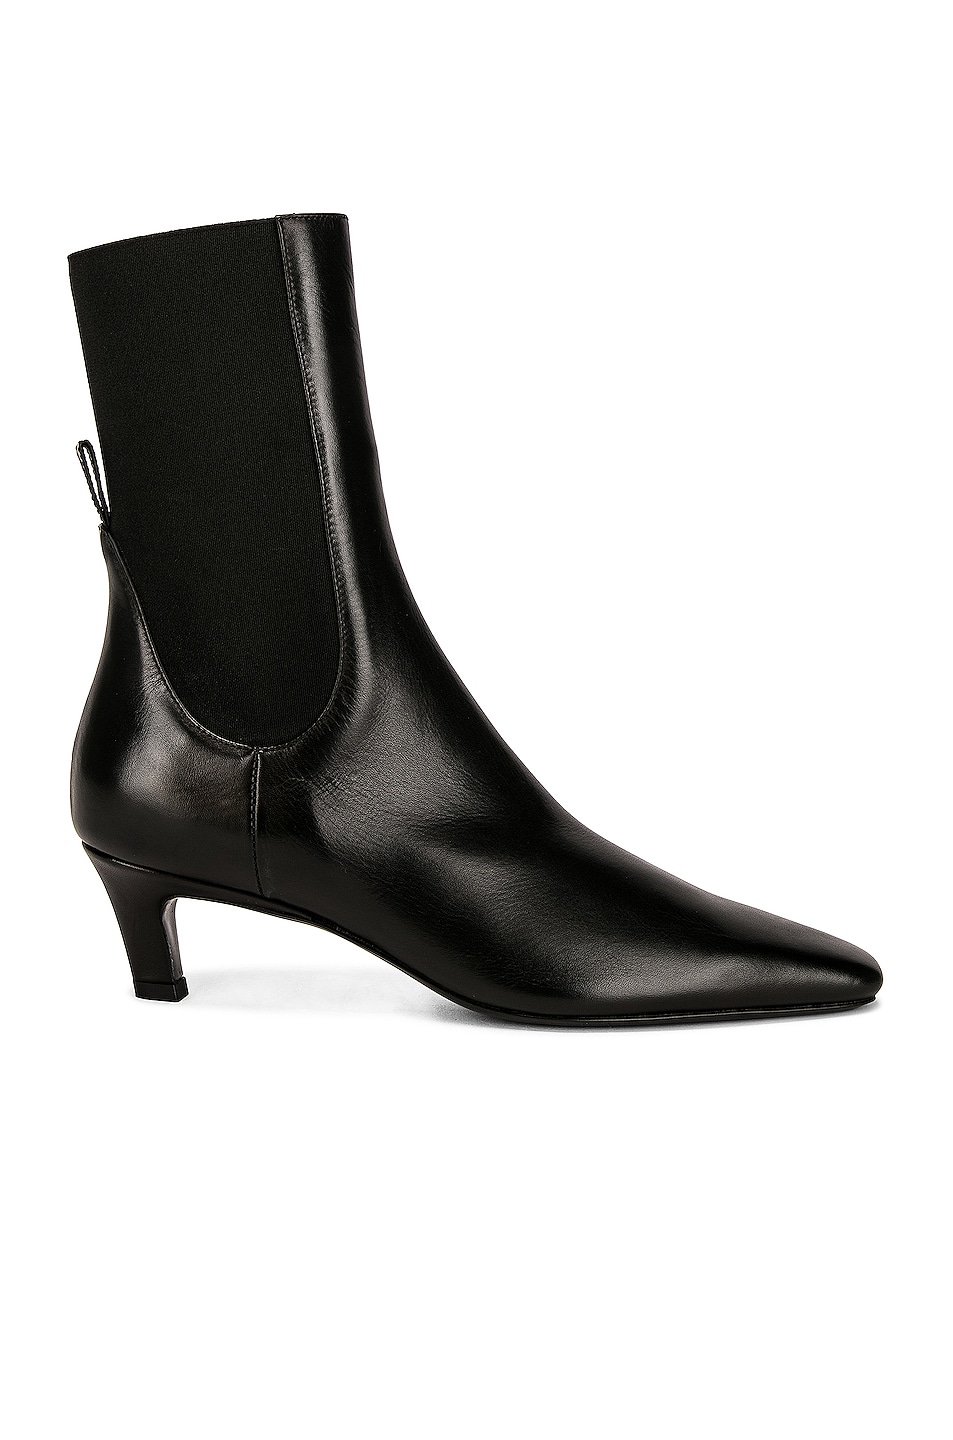 Image 1 of Toteme The Mid Heel Boot in Black